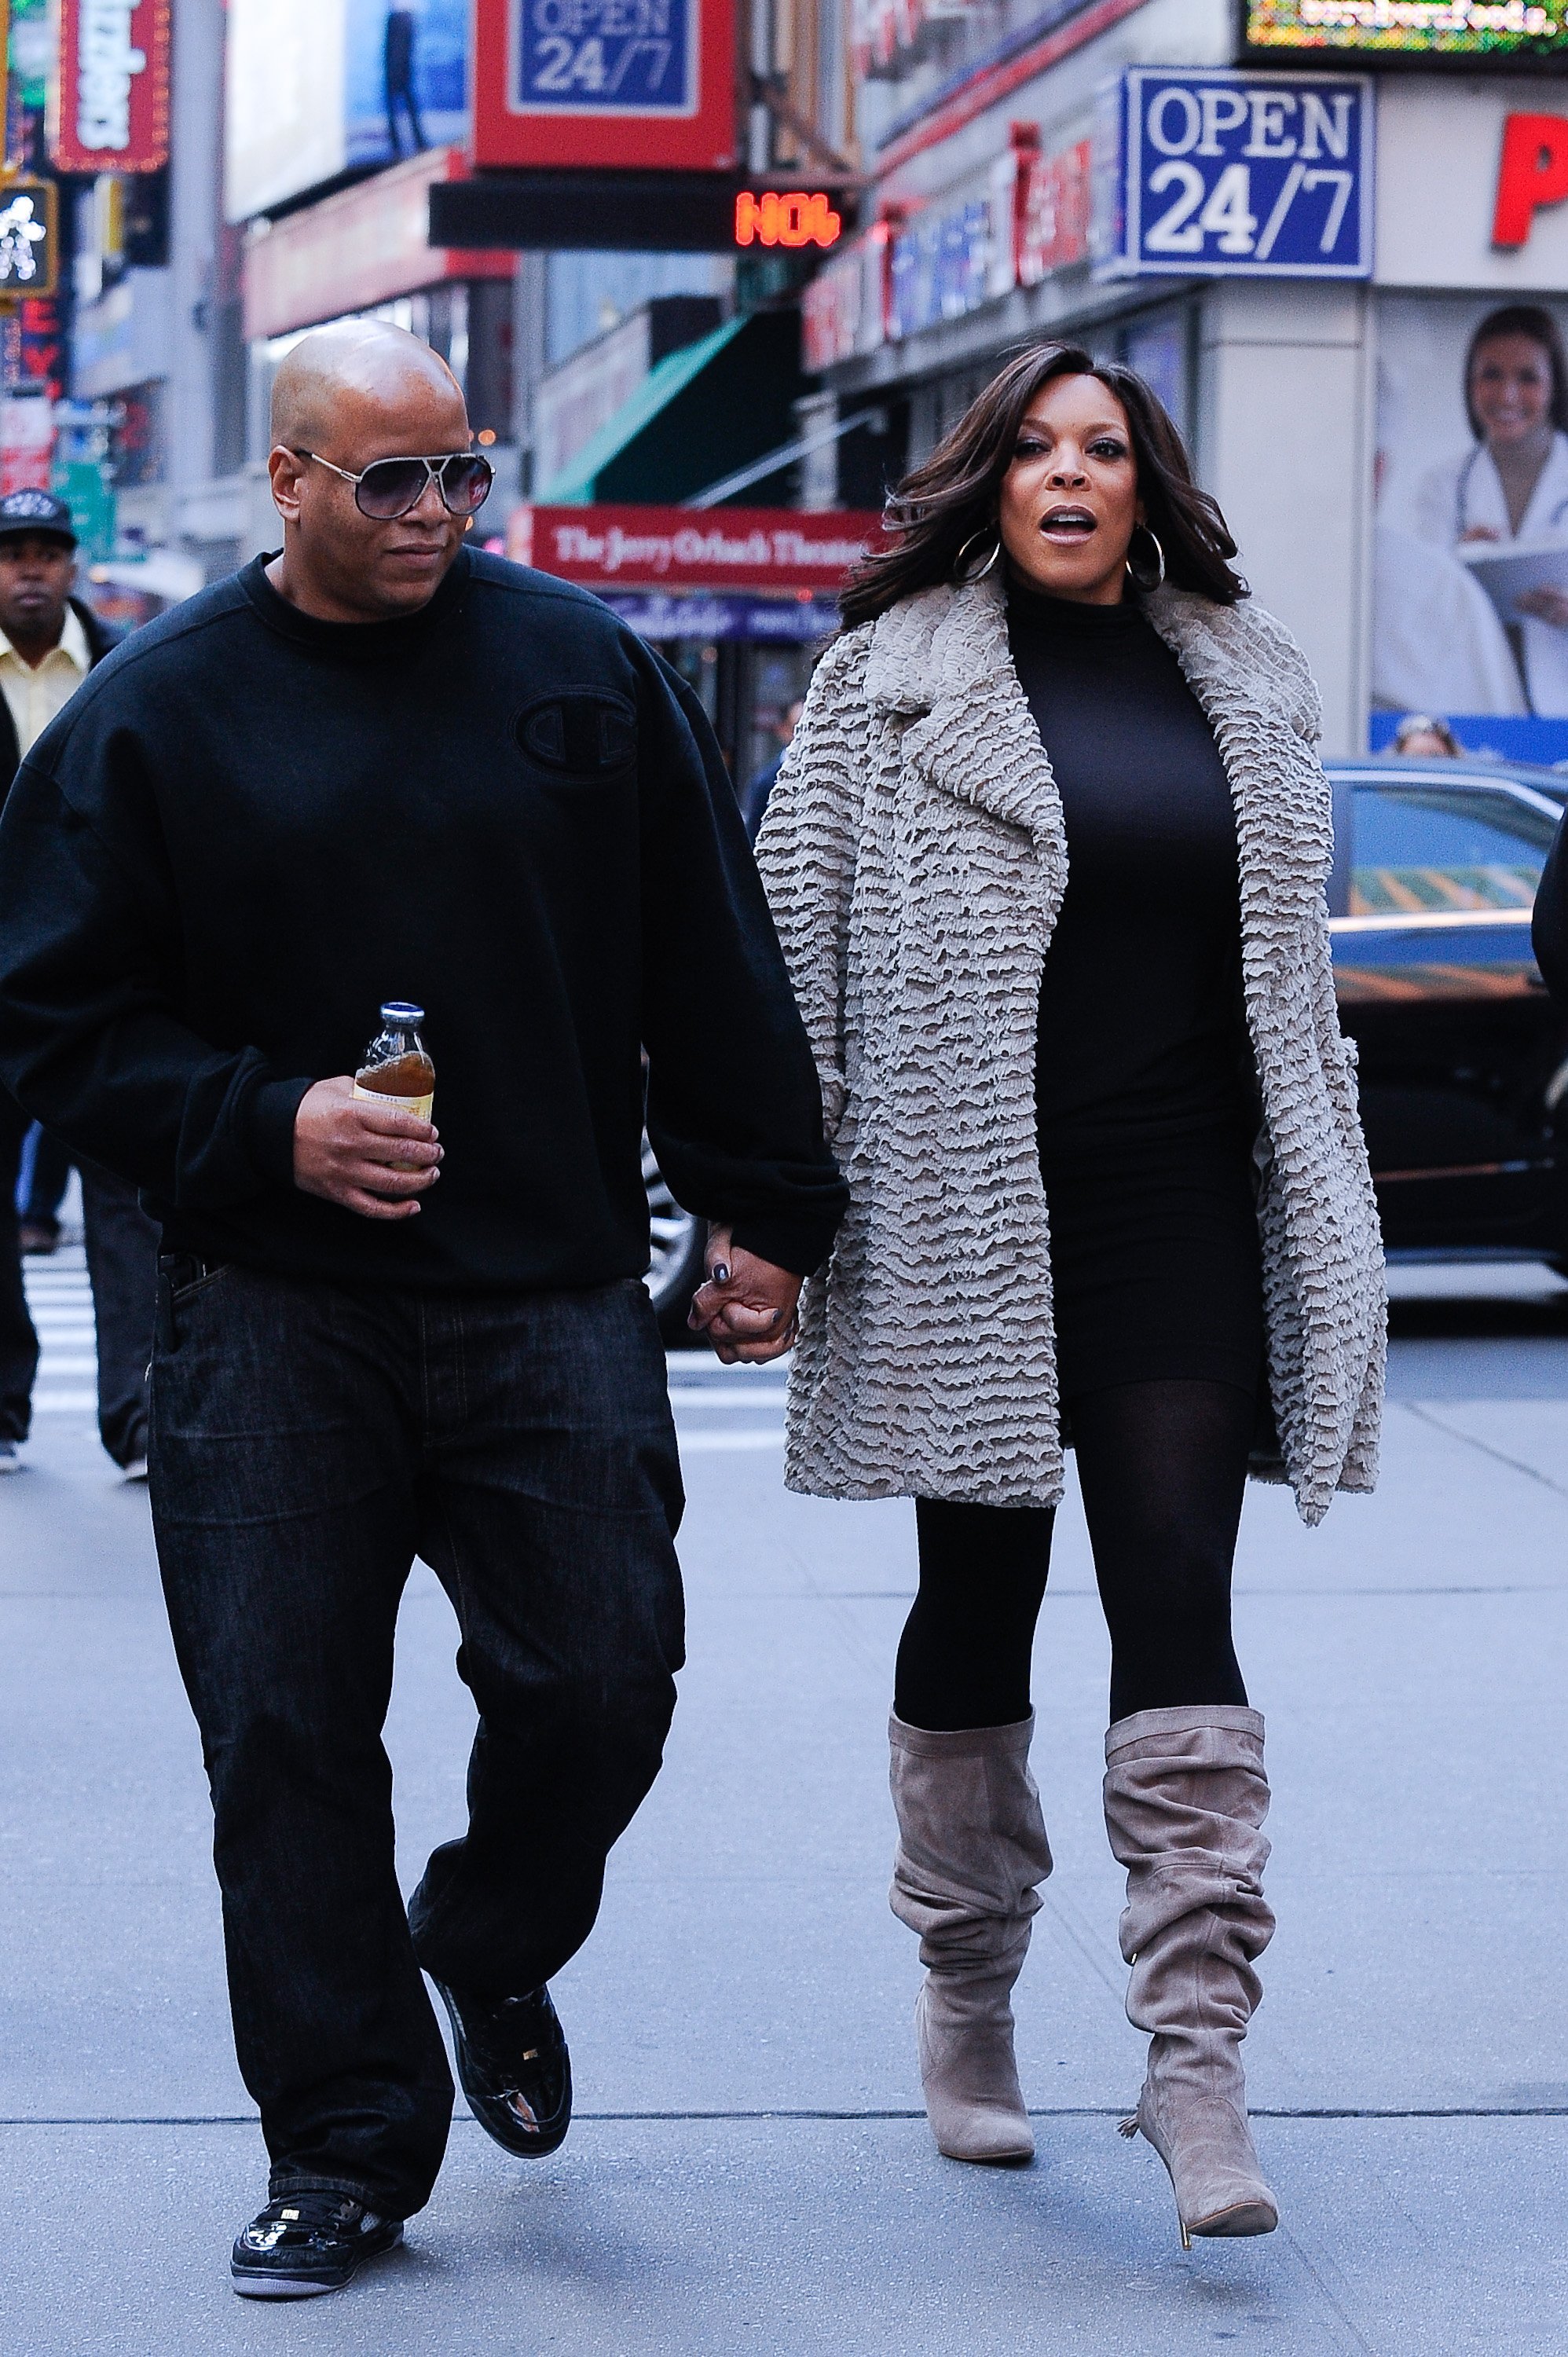 Wendy Williams & Kevin Hunter leave the "Celebrity Apprentice" film set in New York City on Oct. 19, 2010. | Photo: Getty Images